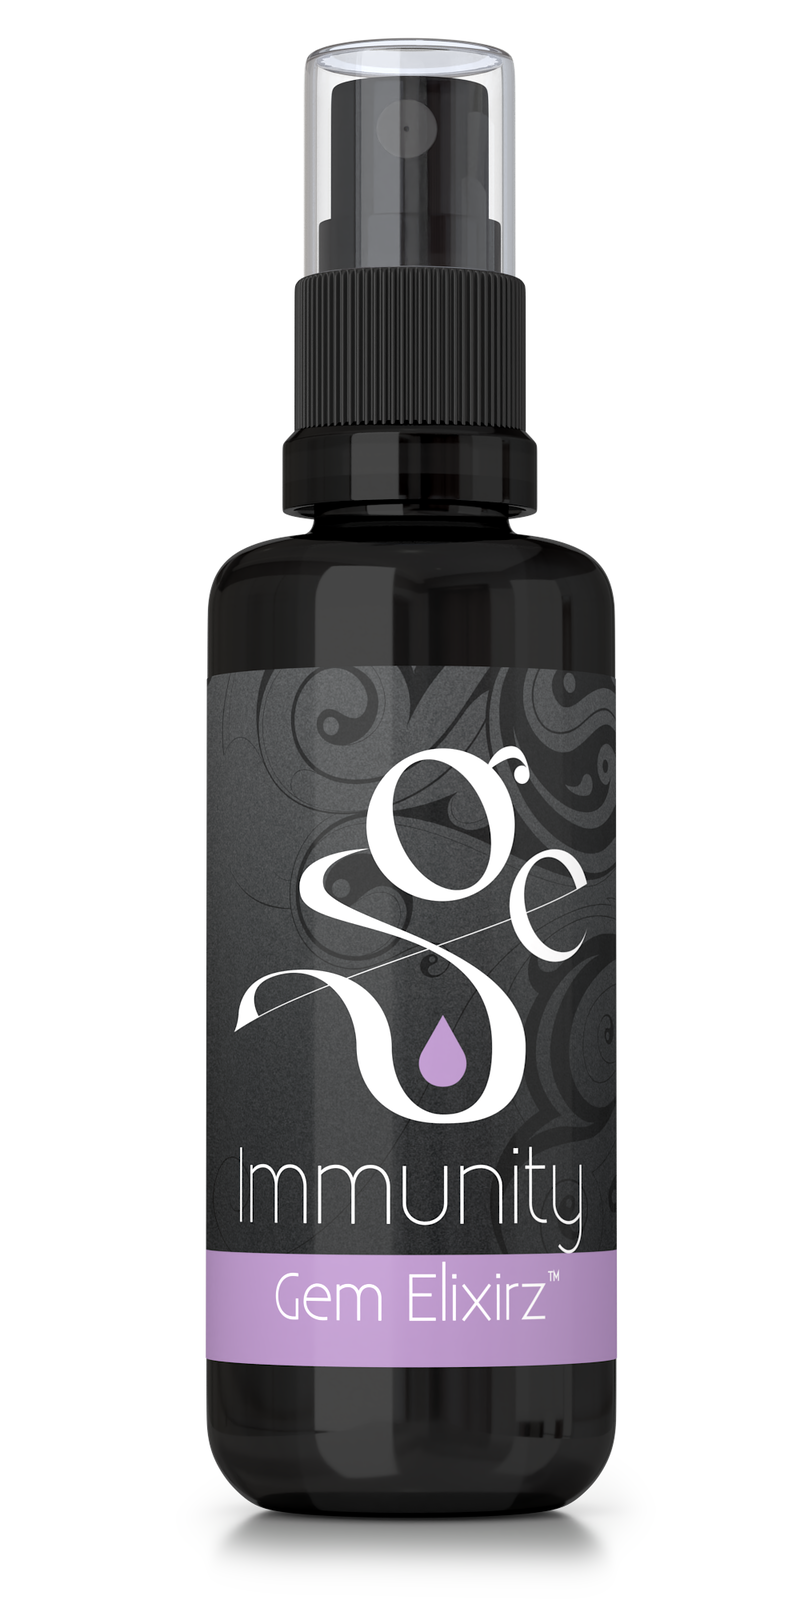 Immunity aromatherapy spray with essential oils and gemstones, frontside of bottle